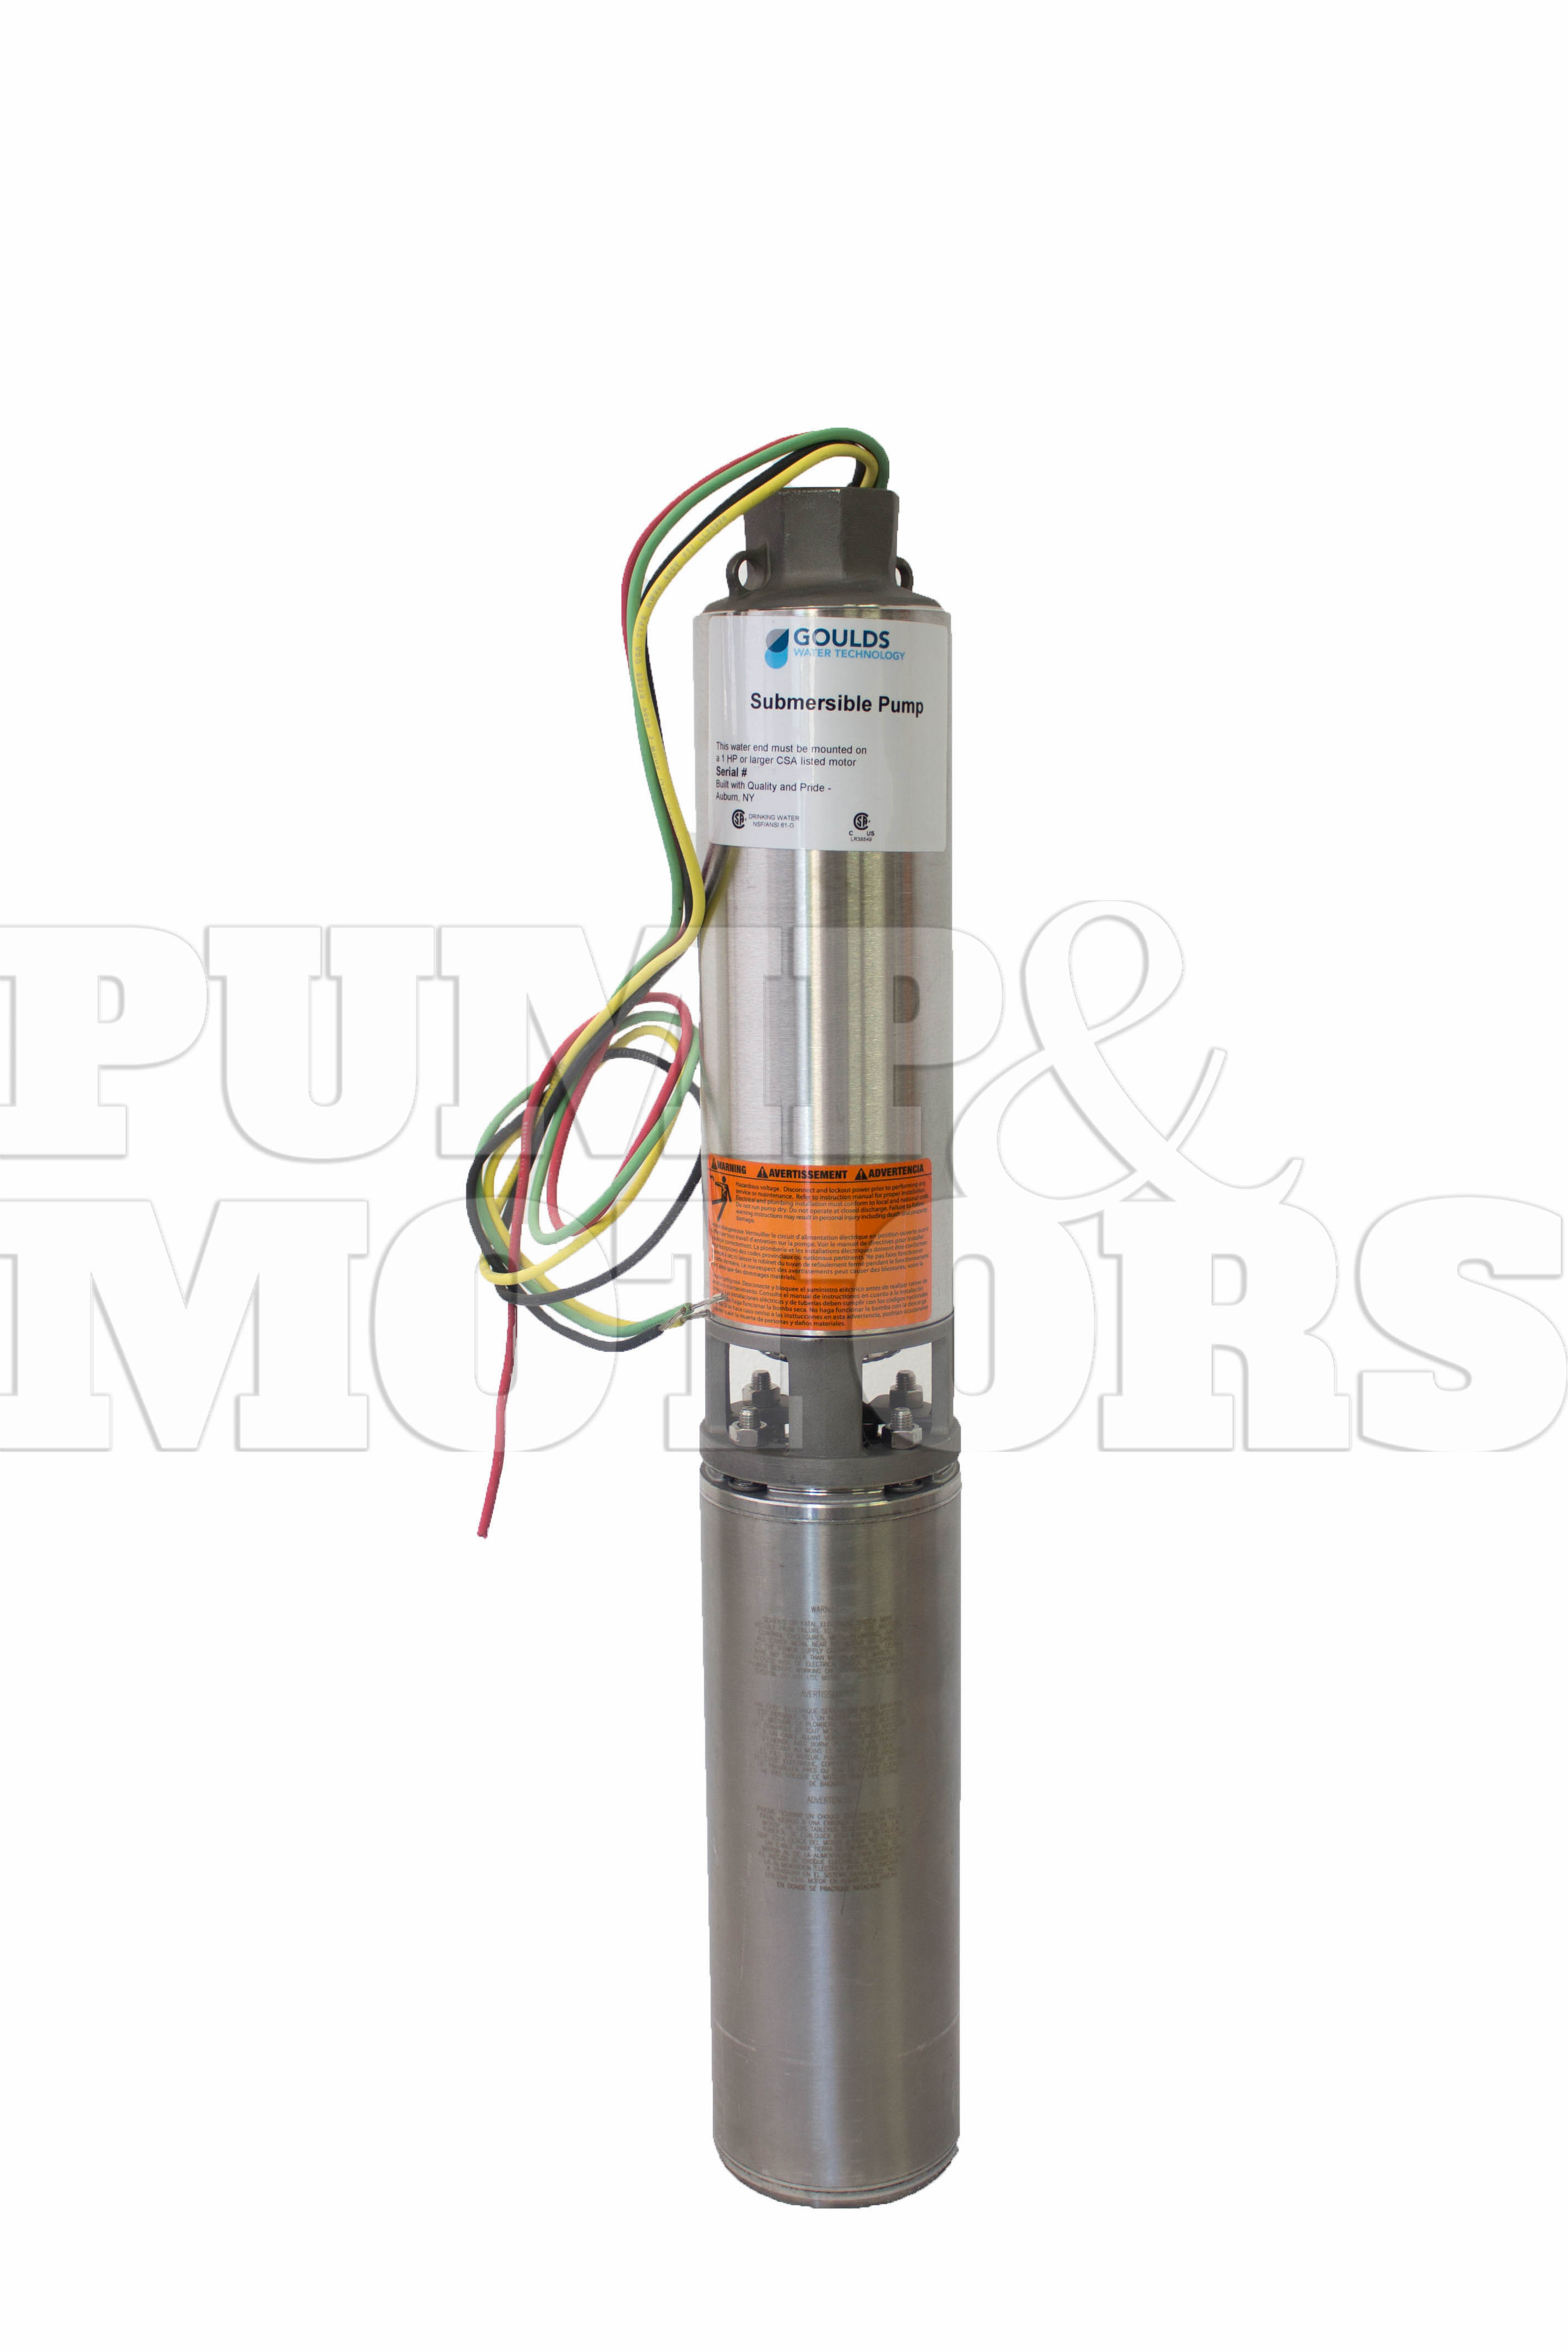 Goulds 80GS30412CL 3 HP 230V Submersible Water Well Pump 80GPM